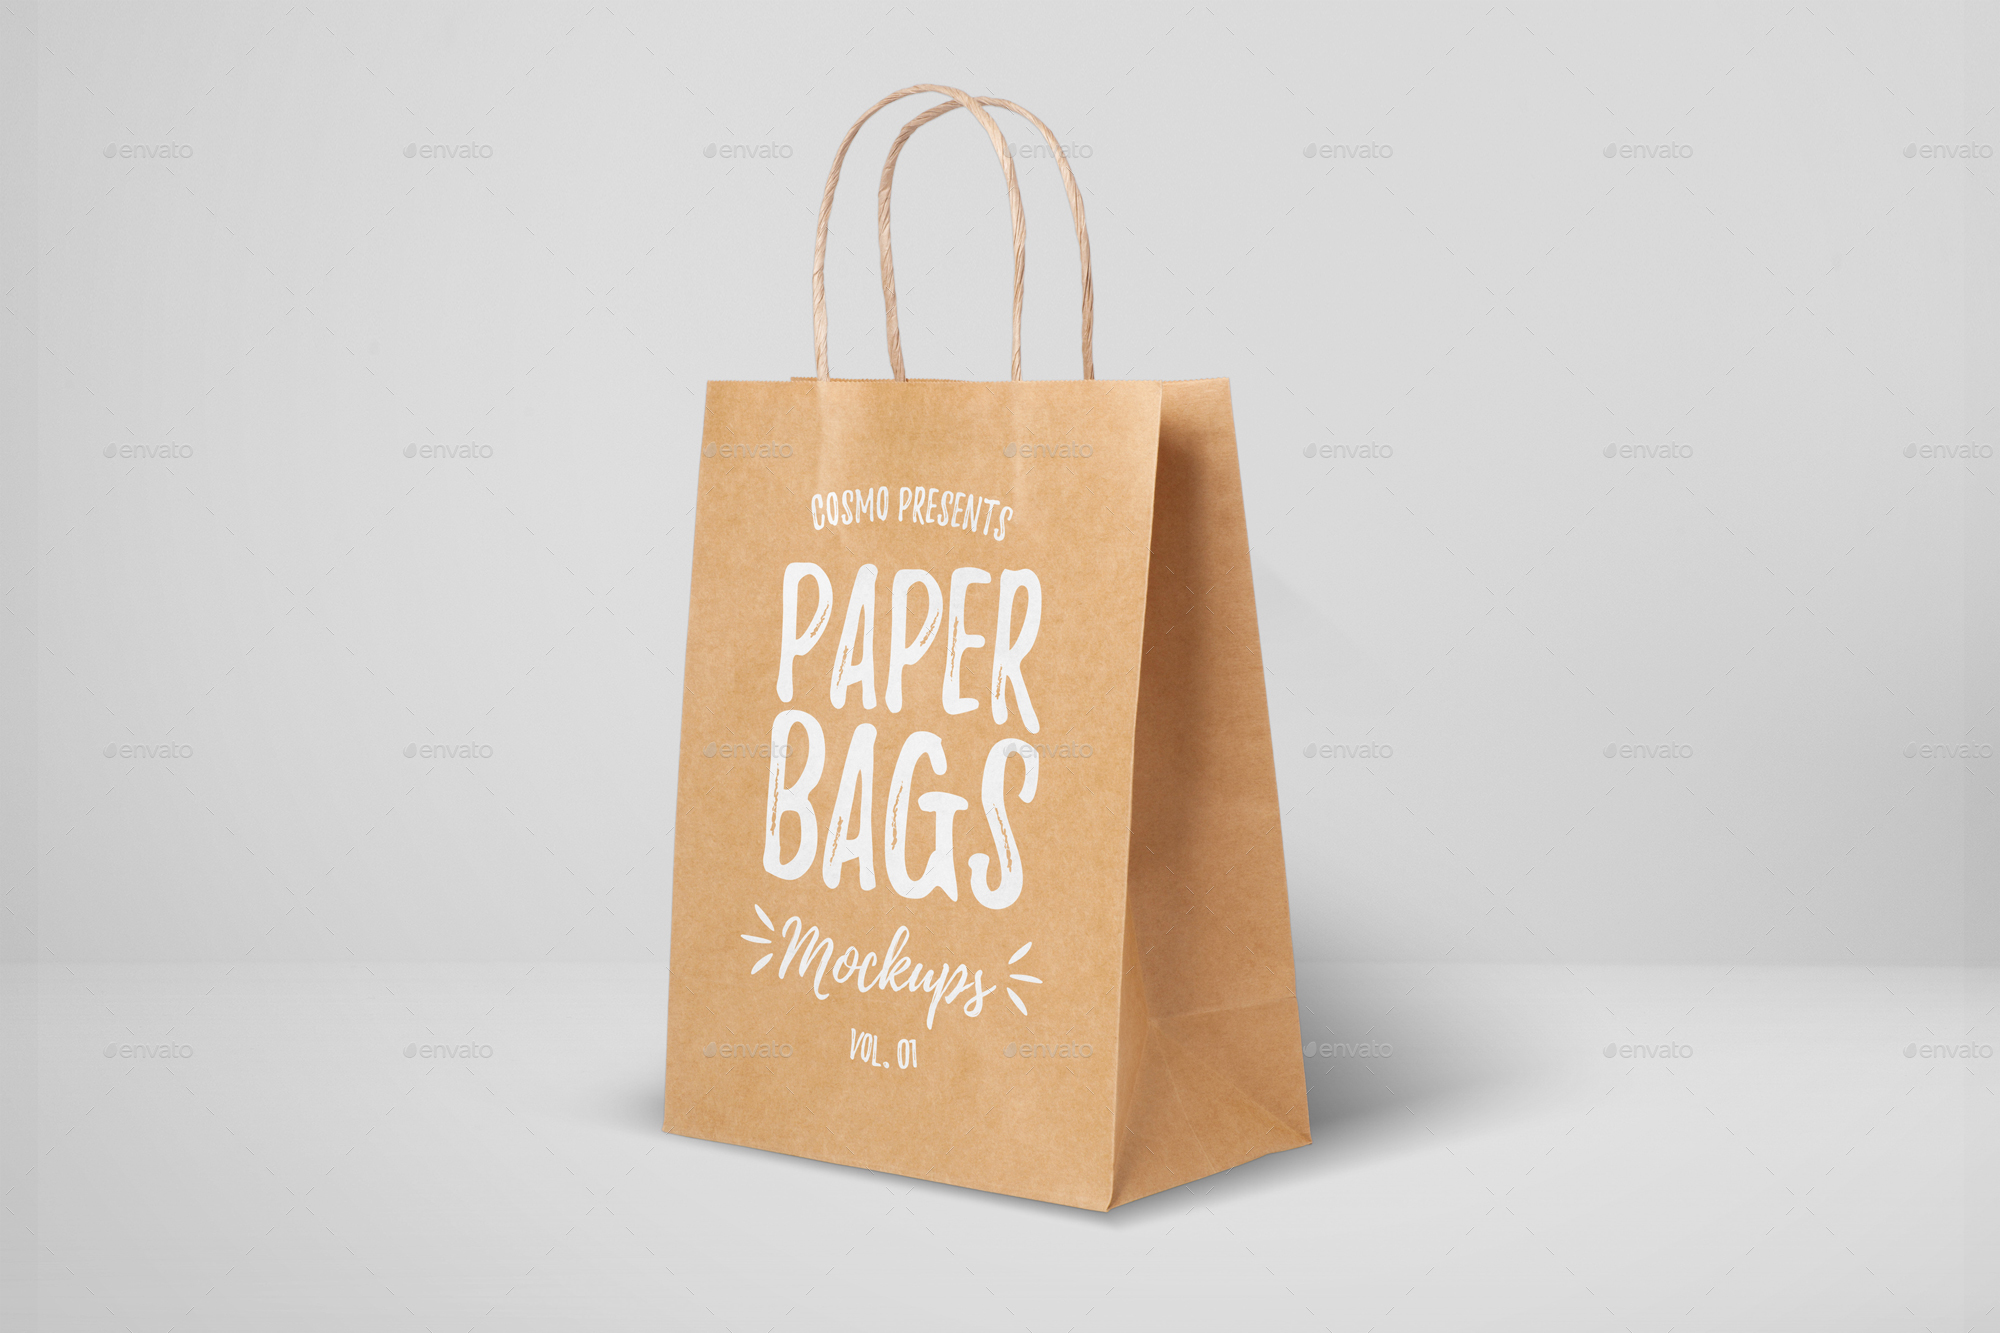 Paper Bags Mockups by Cairographs | GraphicRiver